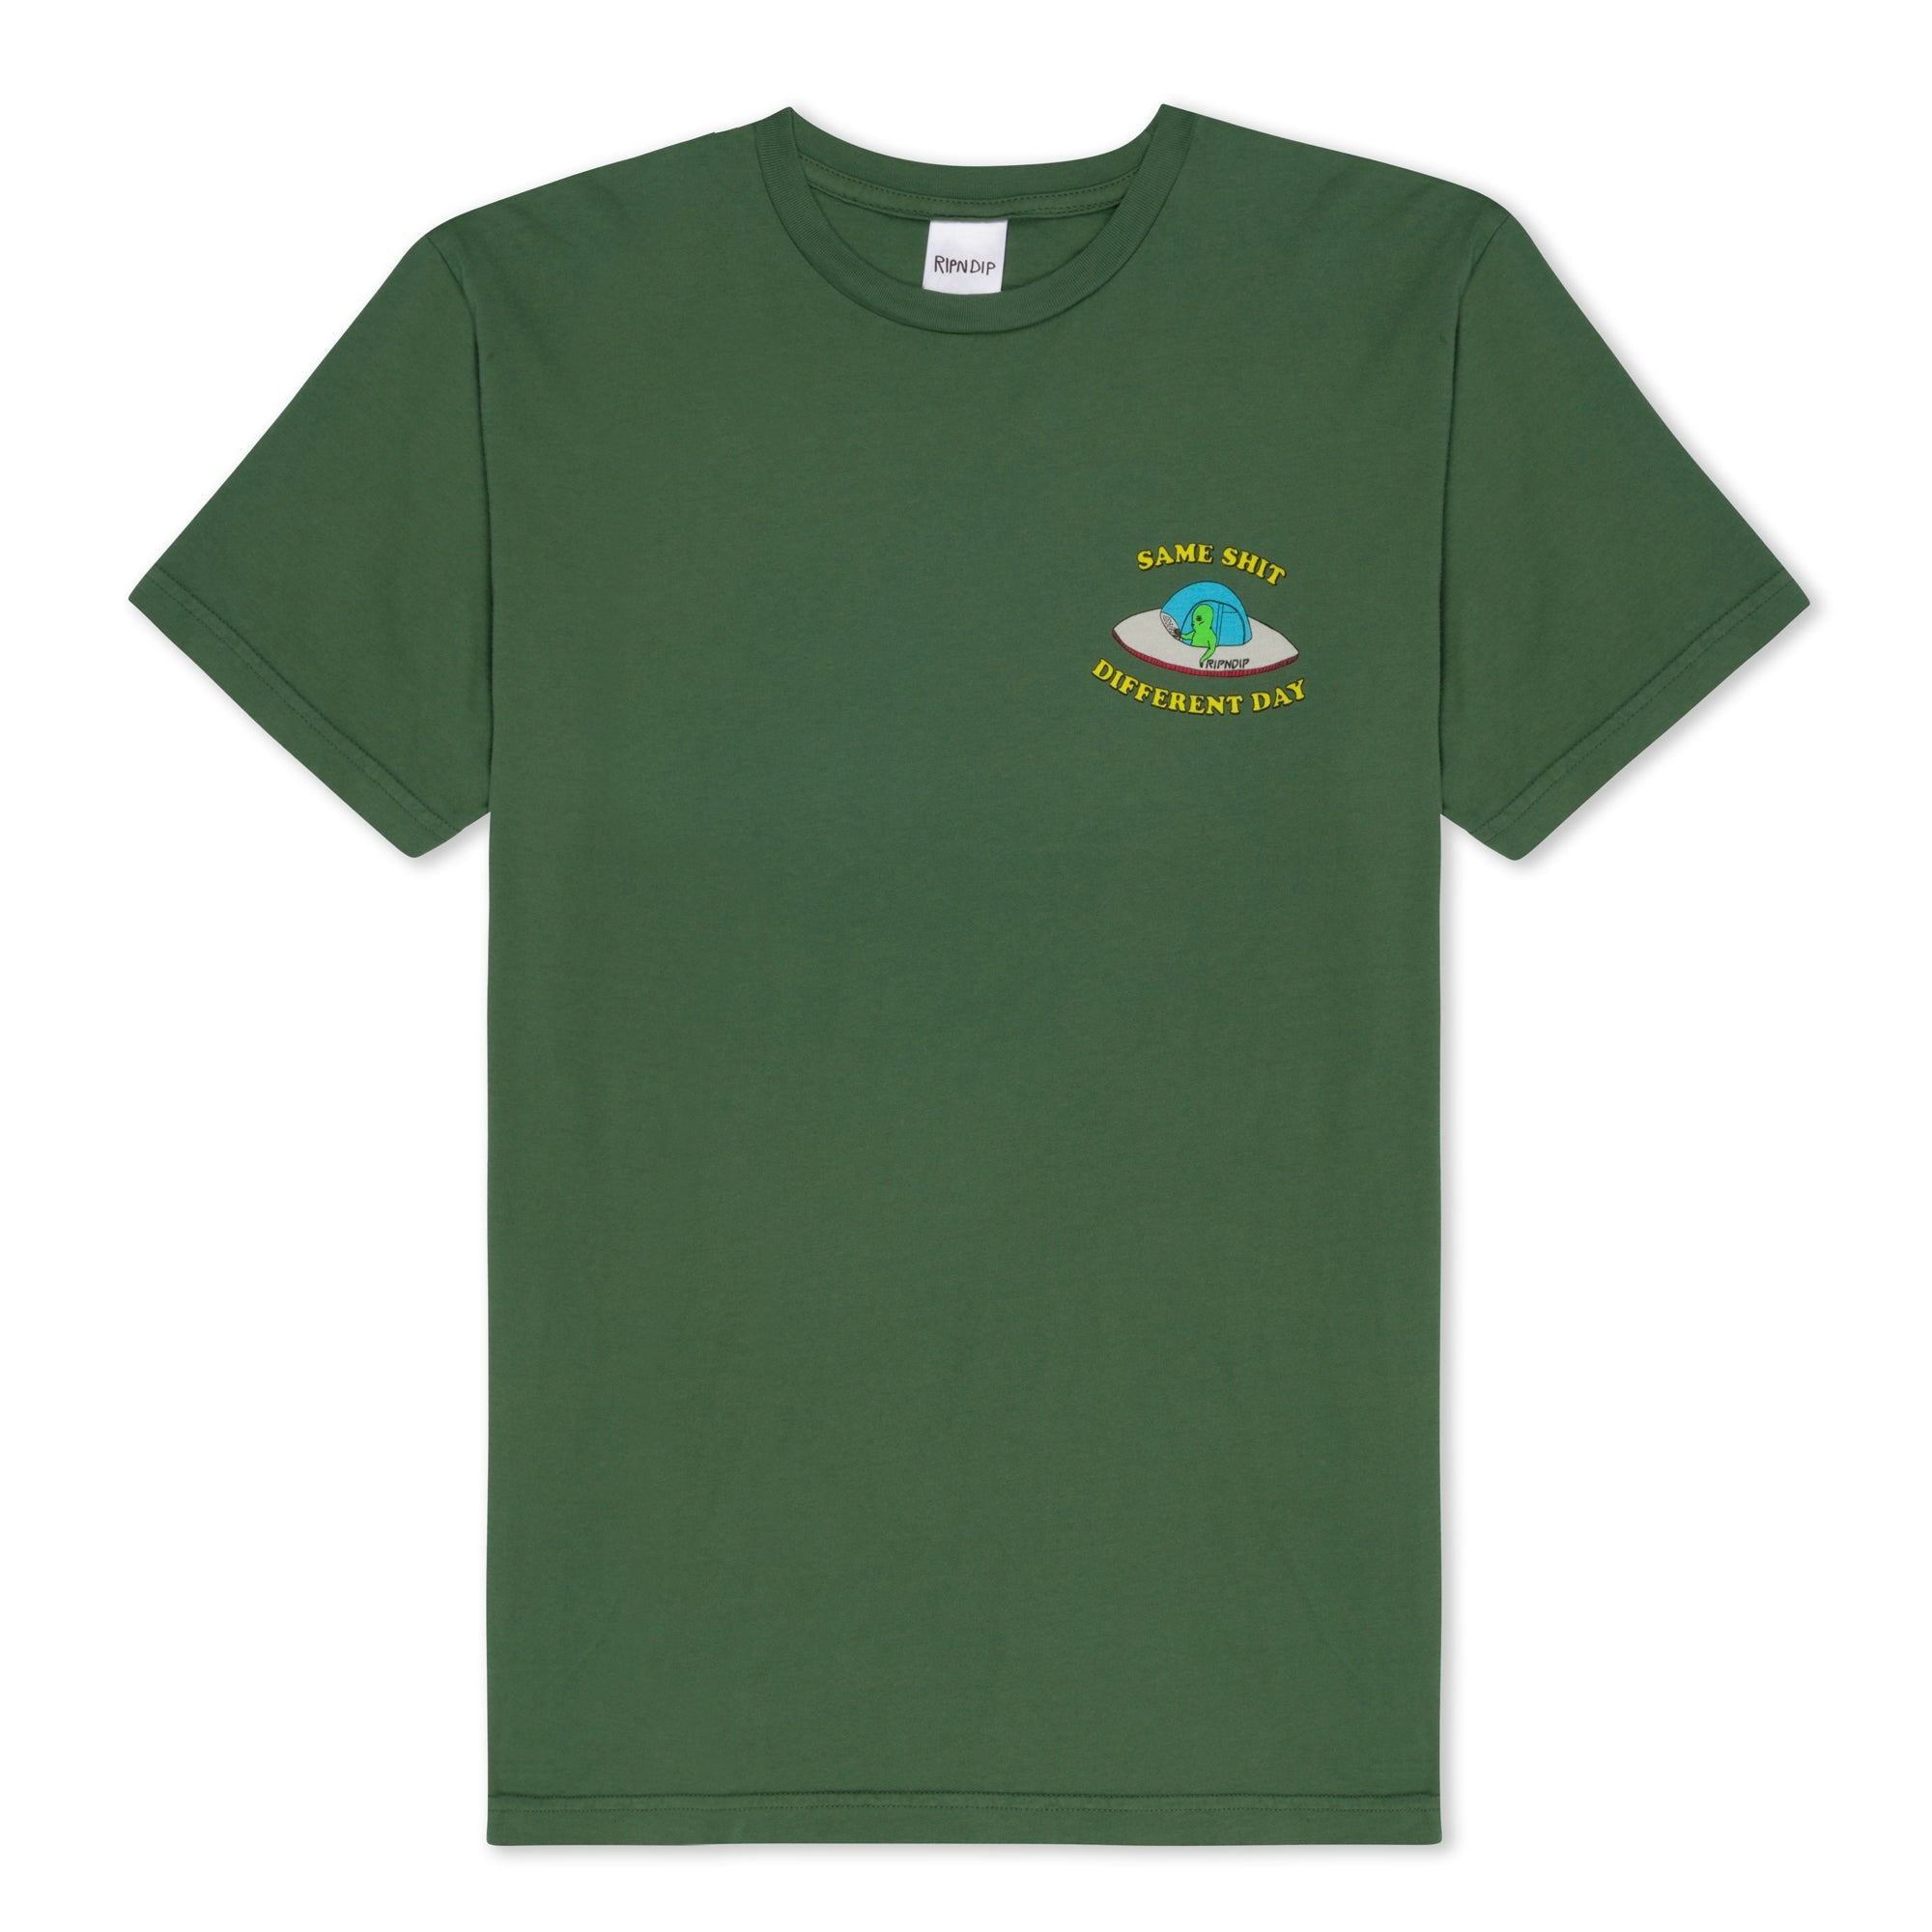 Same Shit Different Day Tee (Olive)